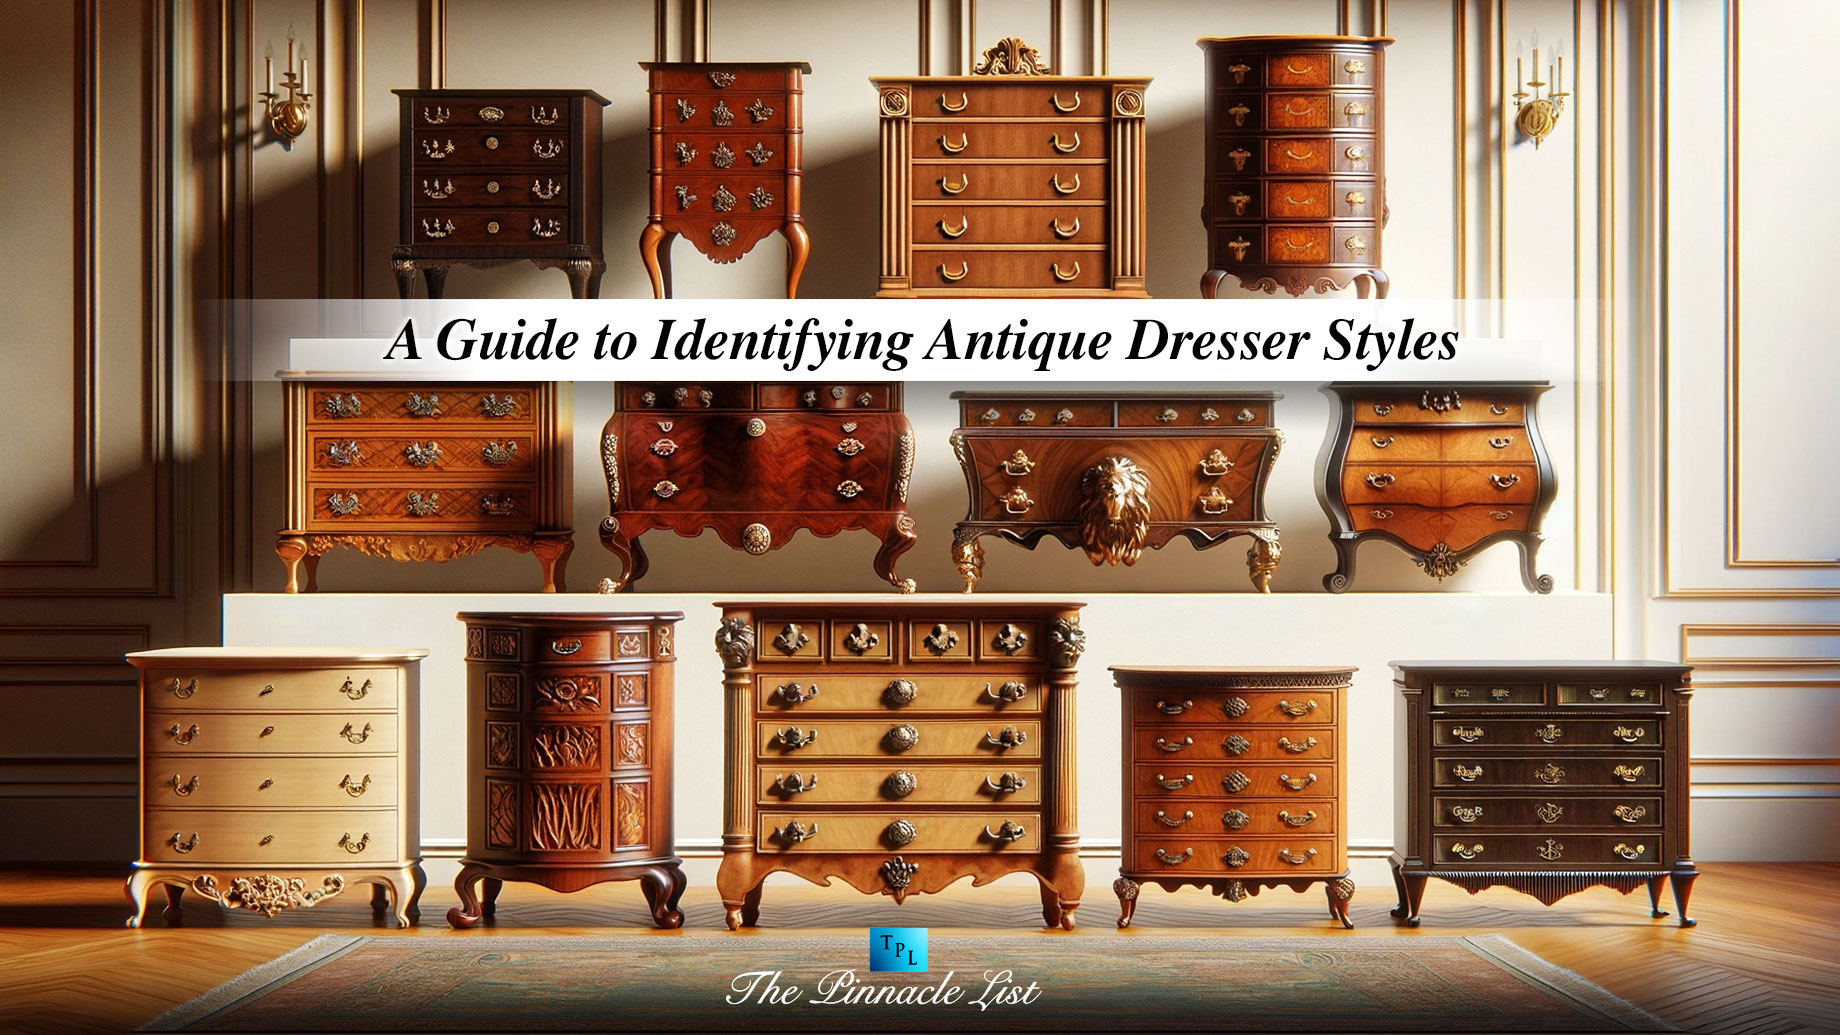 A Guide to Identifying Antique Dresser Styles